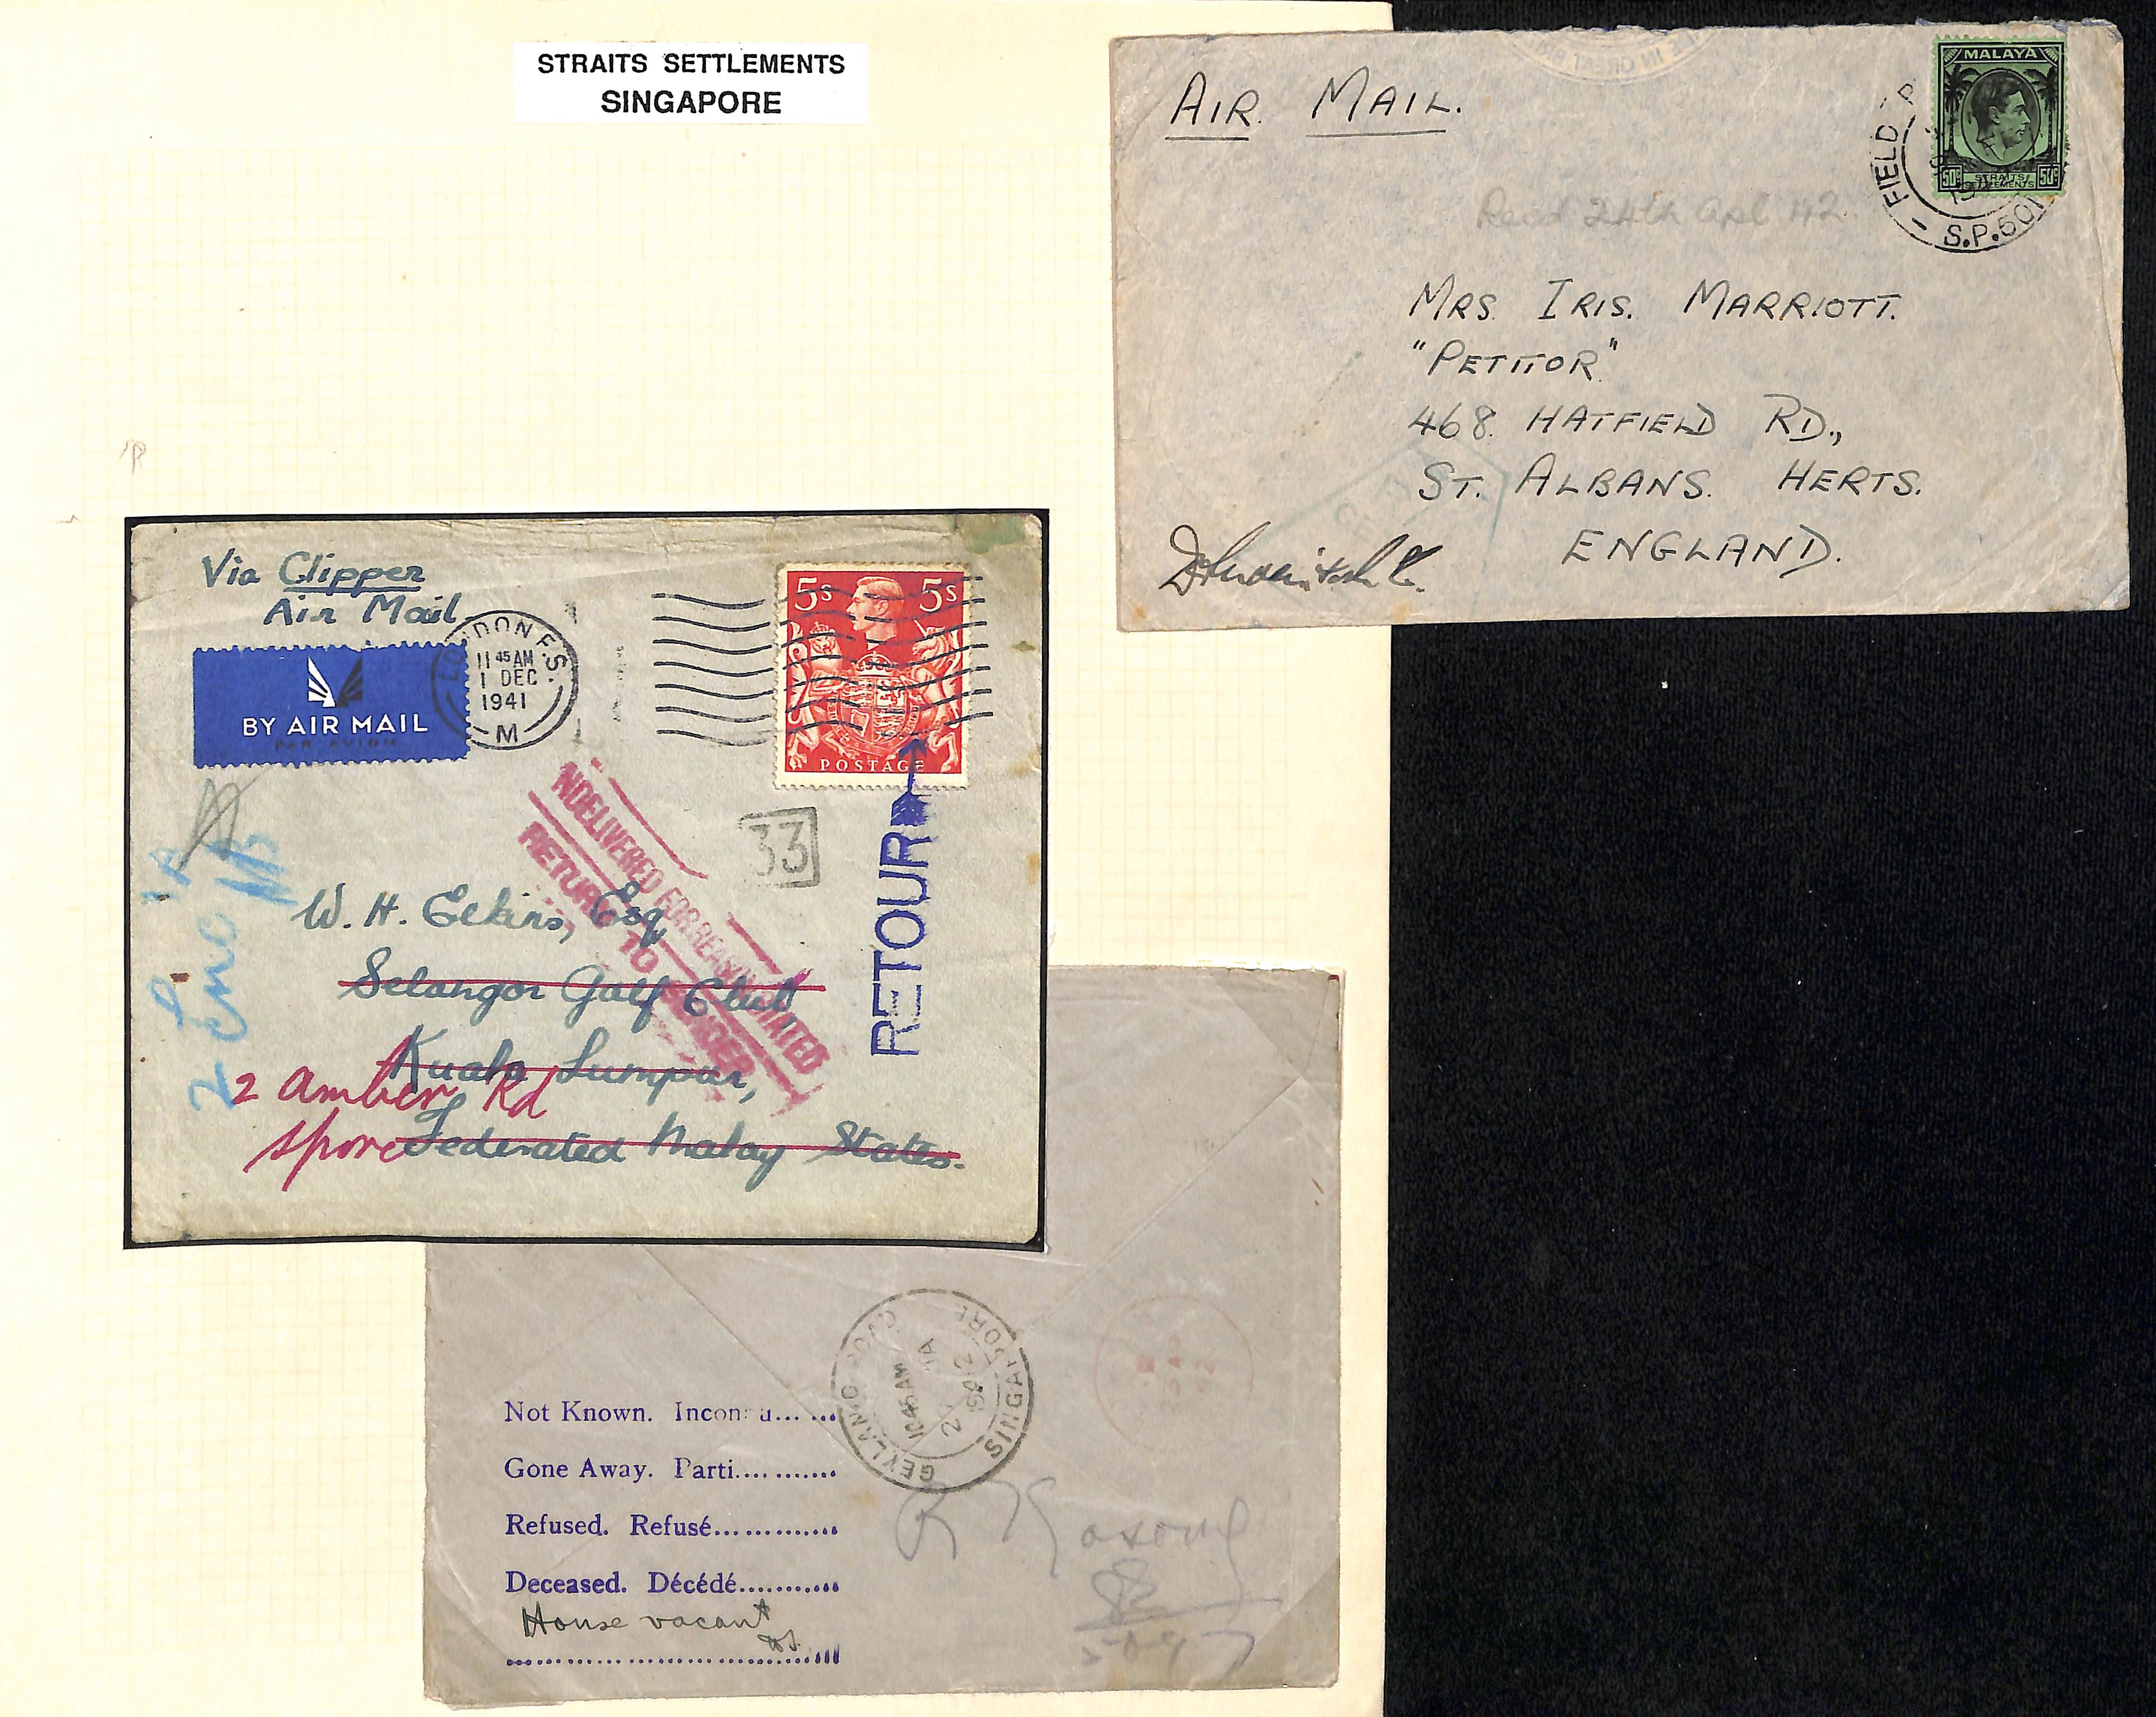 1942 (Jan 27 - Feb 10) Covers sent shortly before the fall of Singapore, comprising 1941 (Dec 1) - Image 2 of 2